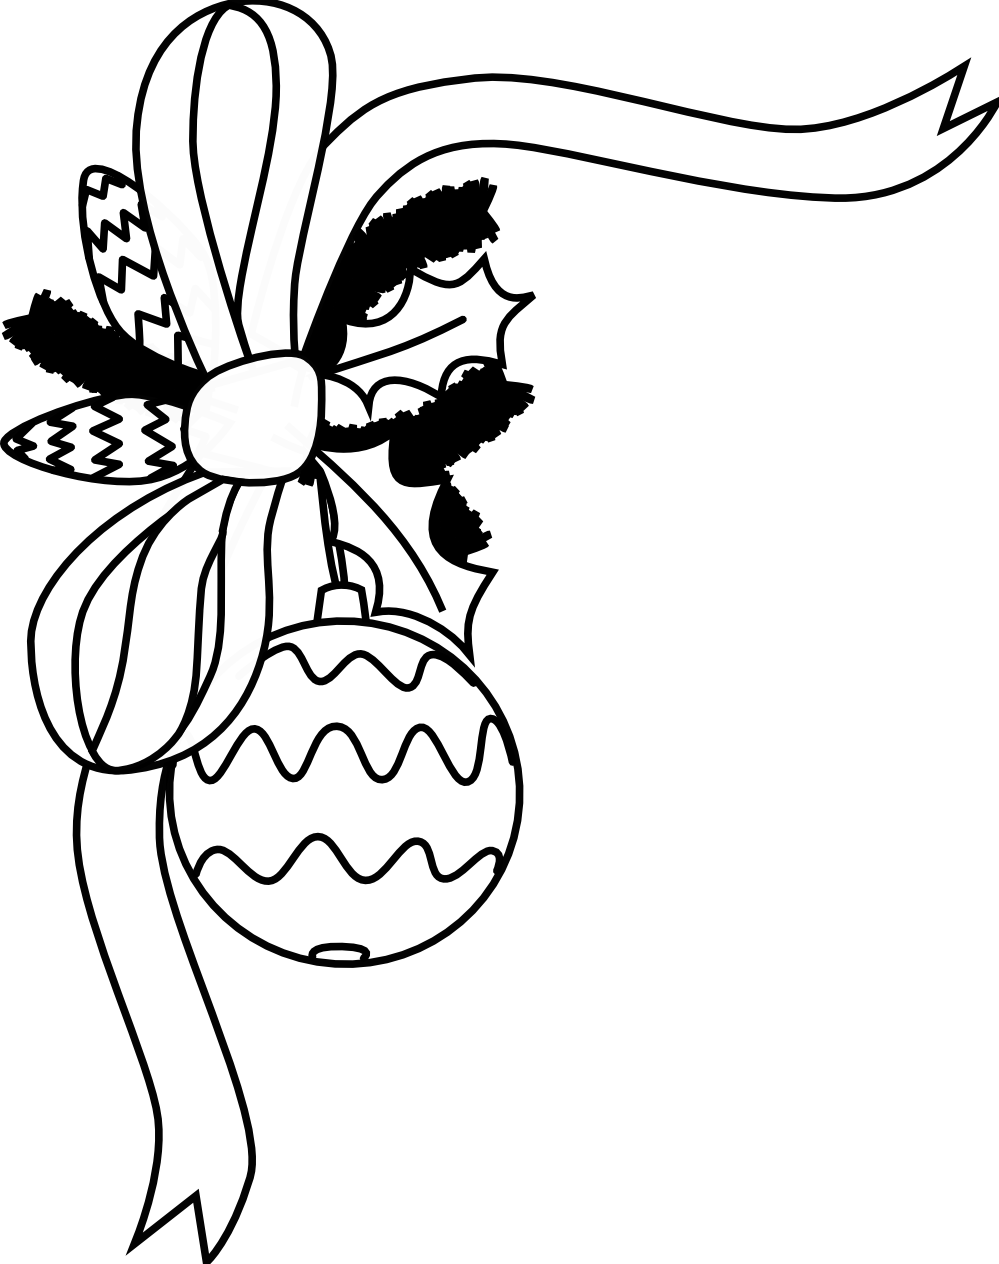 Walrus clipart christmas. Ornament black and white